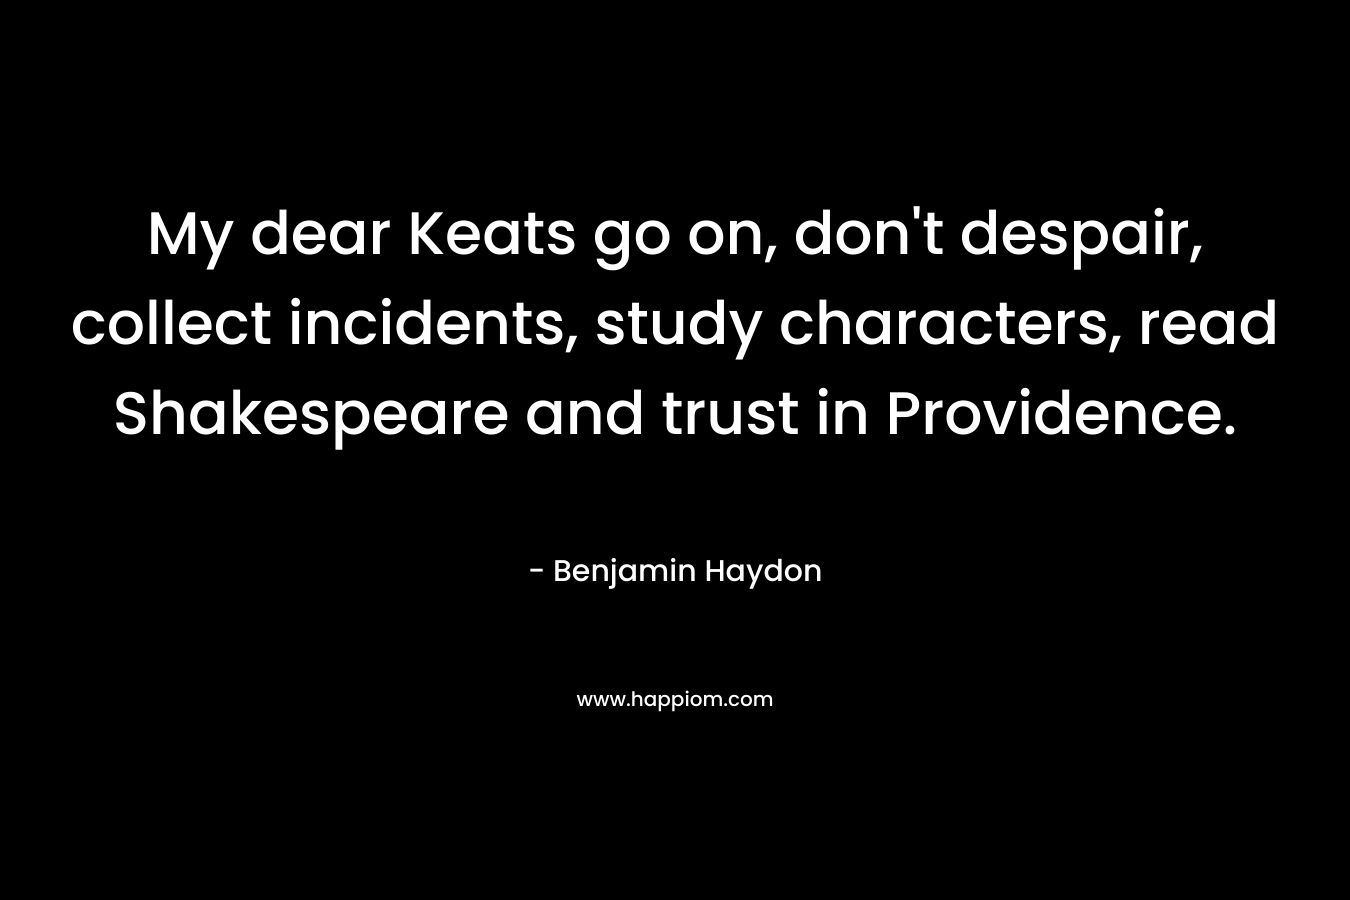 My dear Keats go on, don’t despair, collect incidents, study characters, read Shakespeare and trust in Providence. – Benjamin Haydon